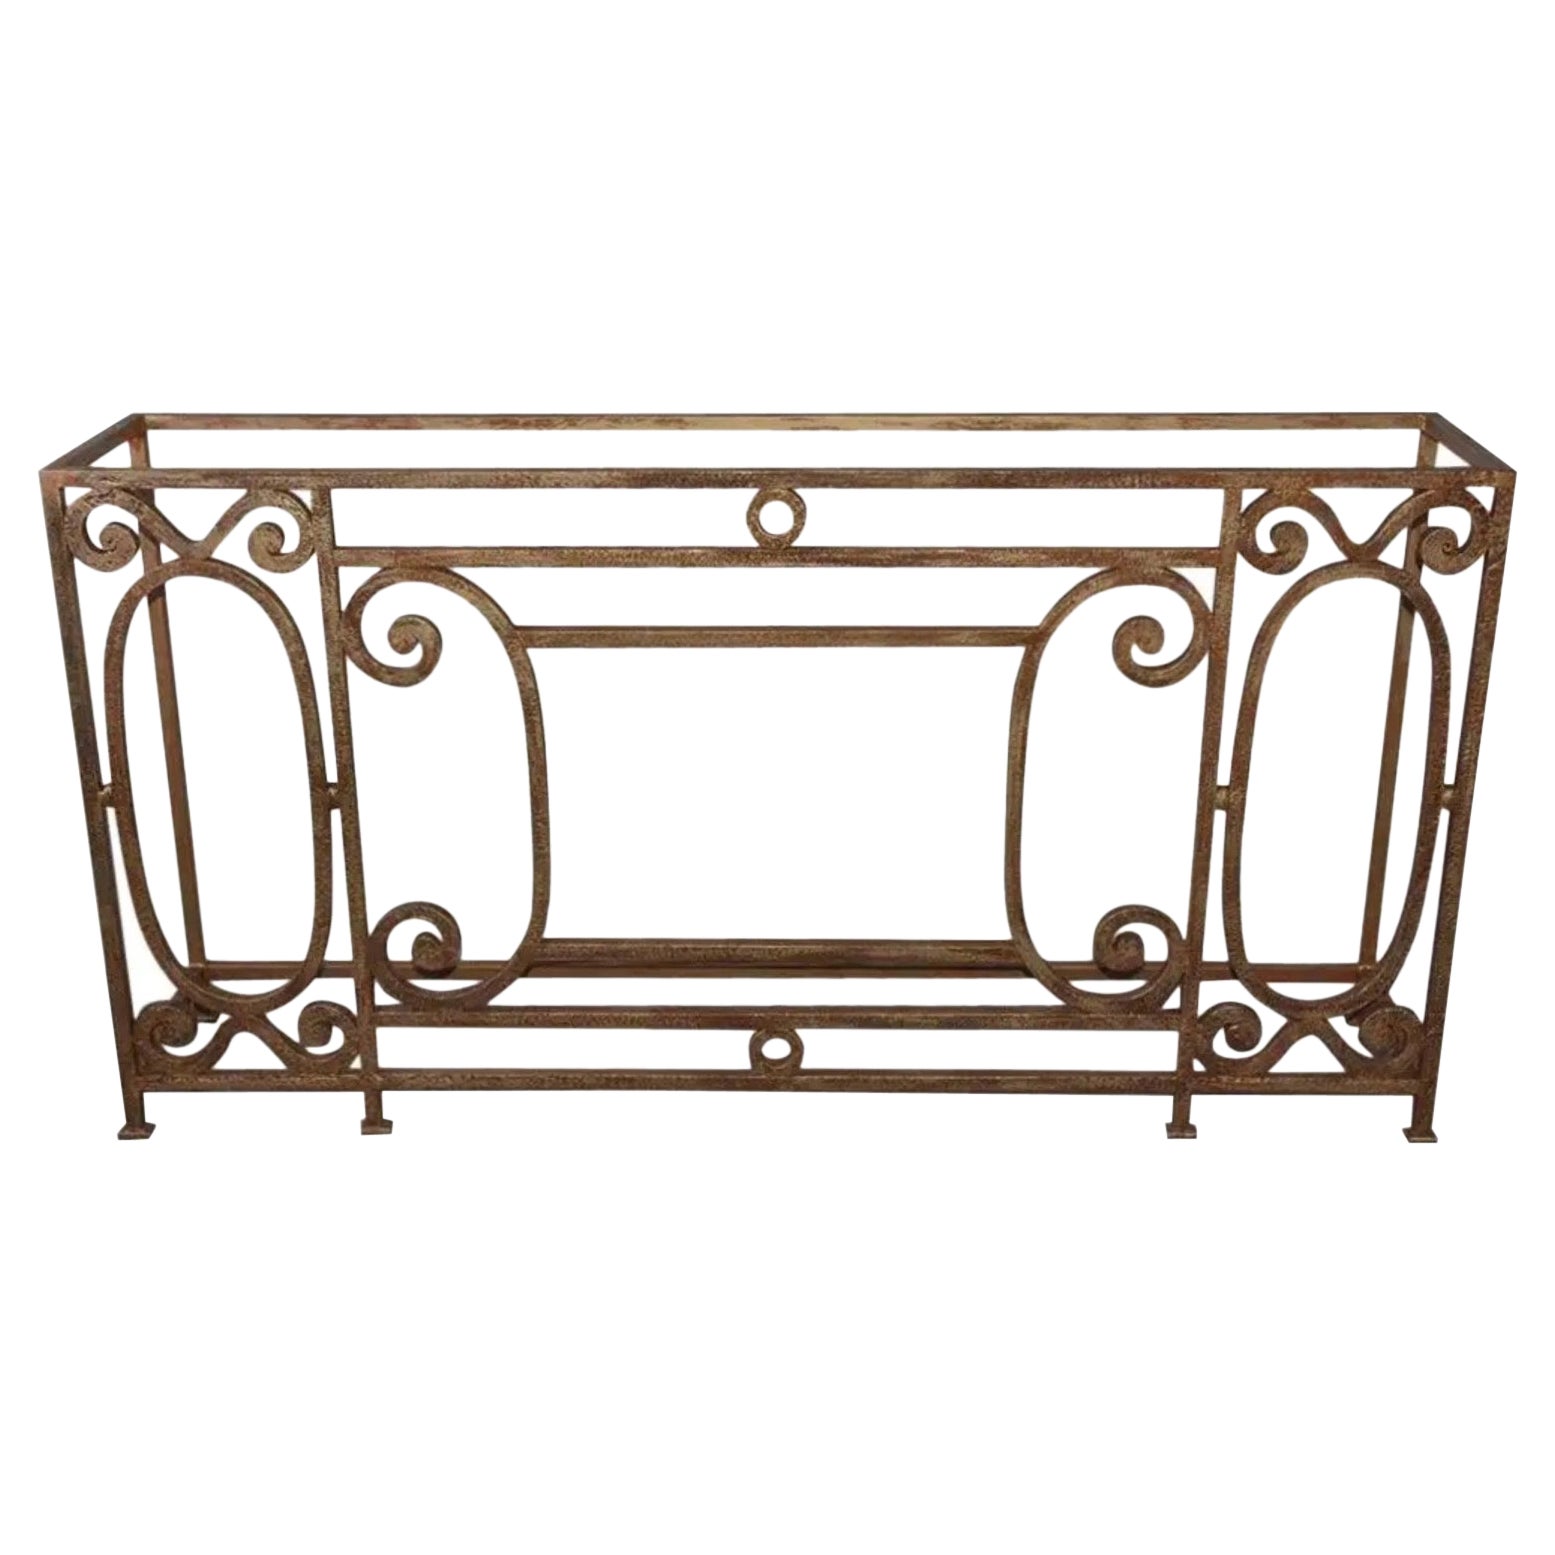 Custom Baroque-Style Wrought Iron Console Table or Server Base